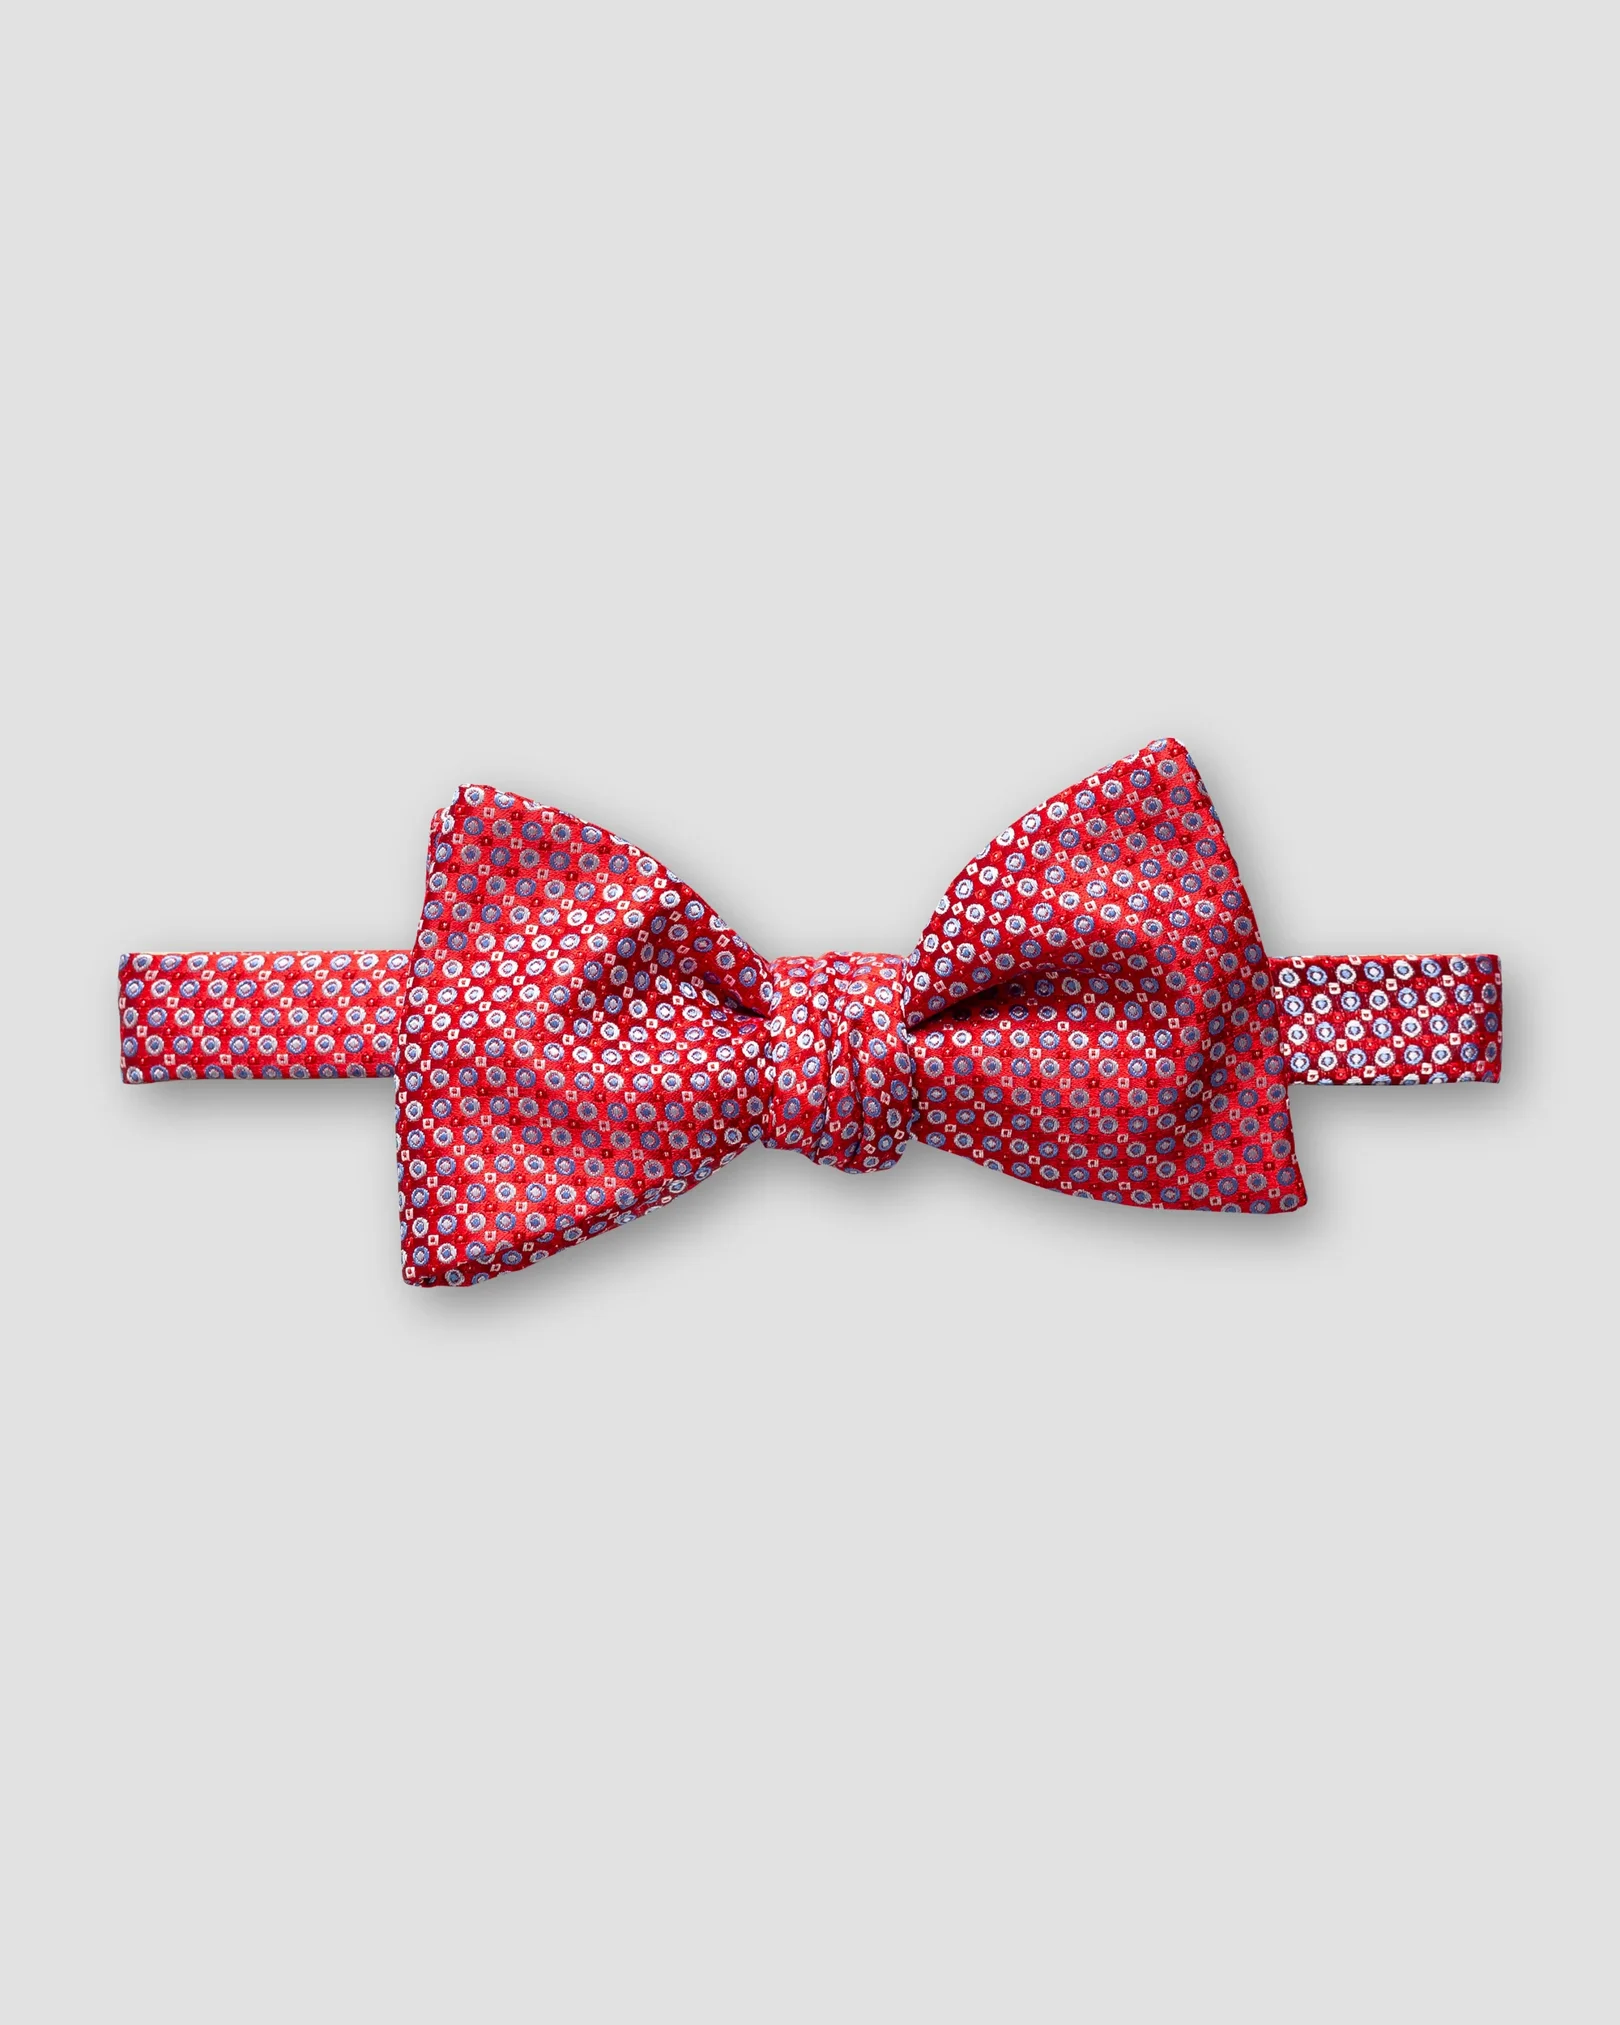 Eton - red dots squares bow tie self tied